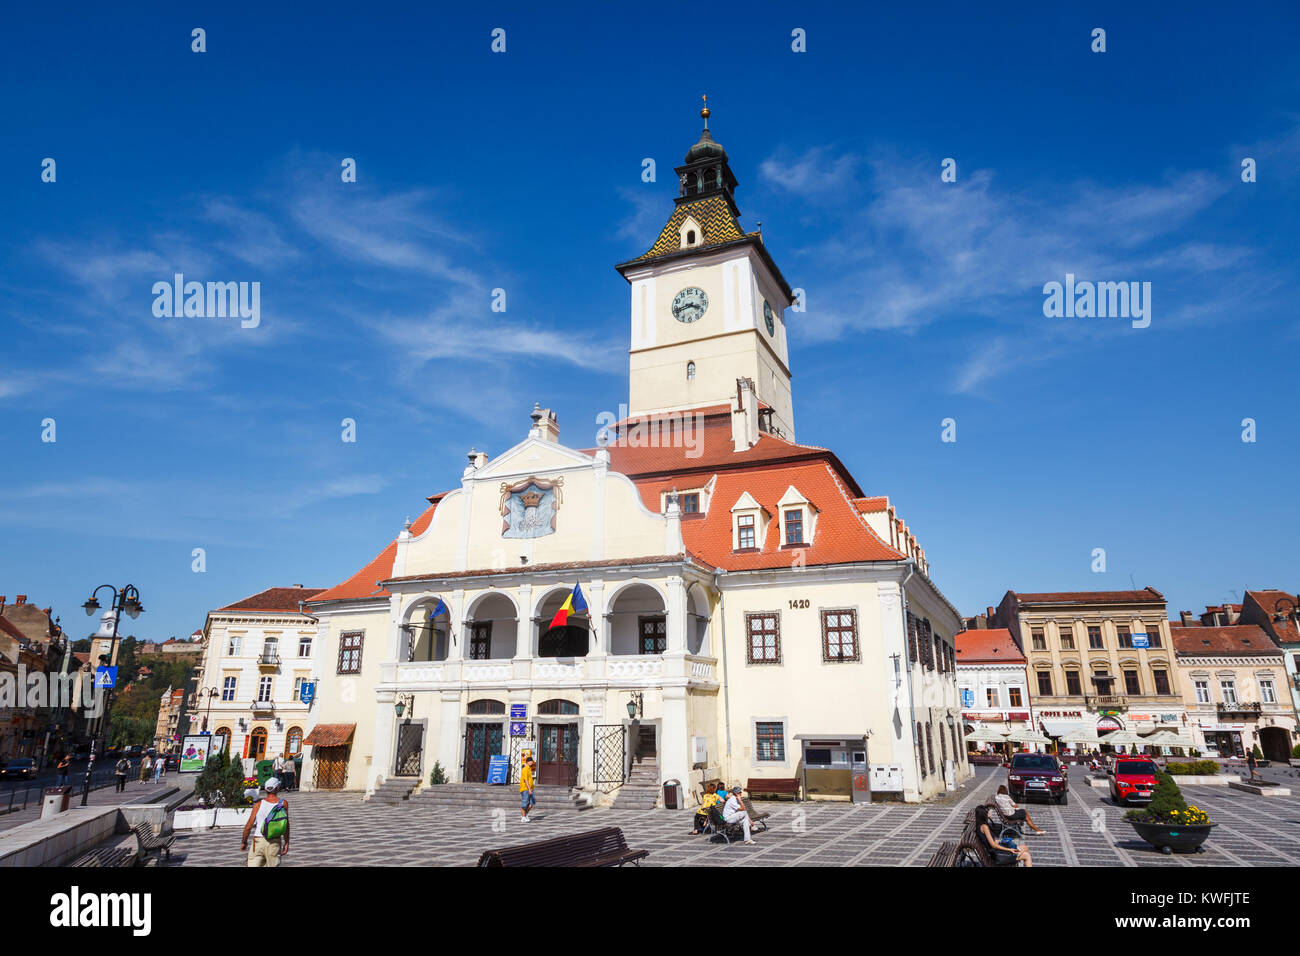 Medieval Council House (housing the Brasov County Museum of History) in Council Square, Brasov, a city in the central Transylvania region of Romania Stock Photo